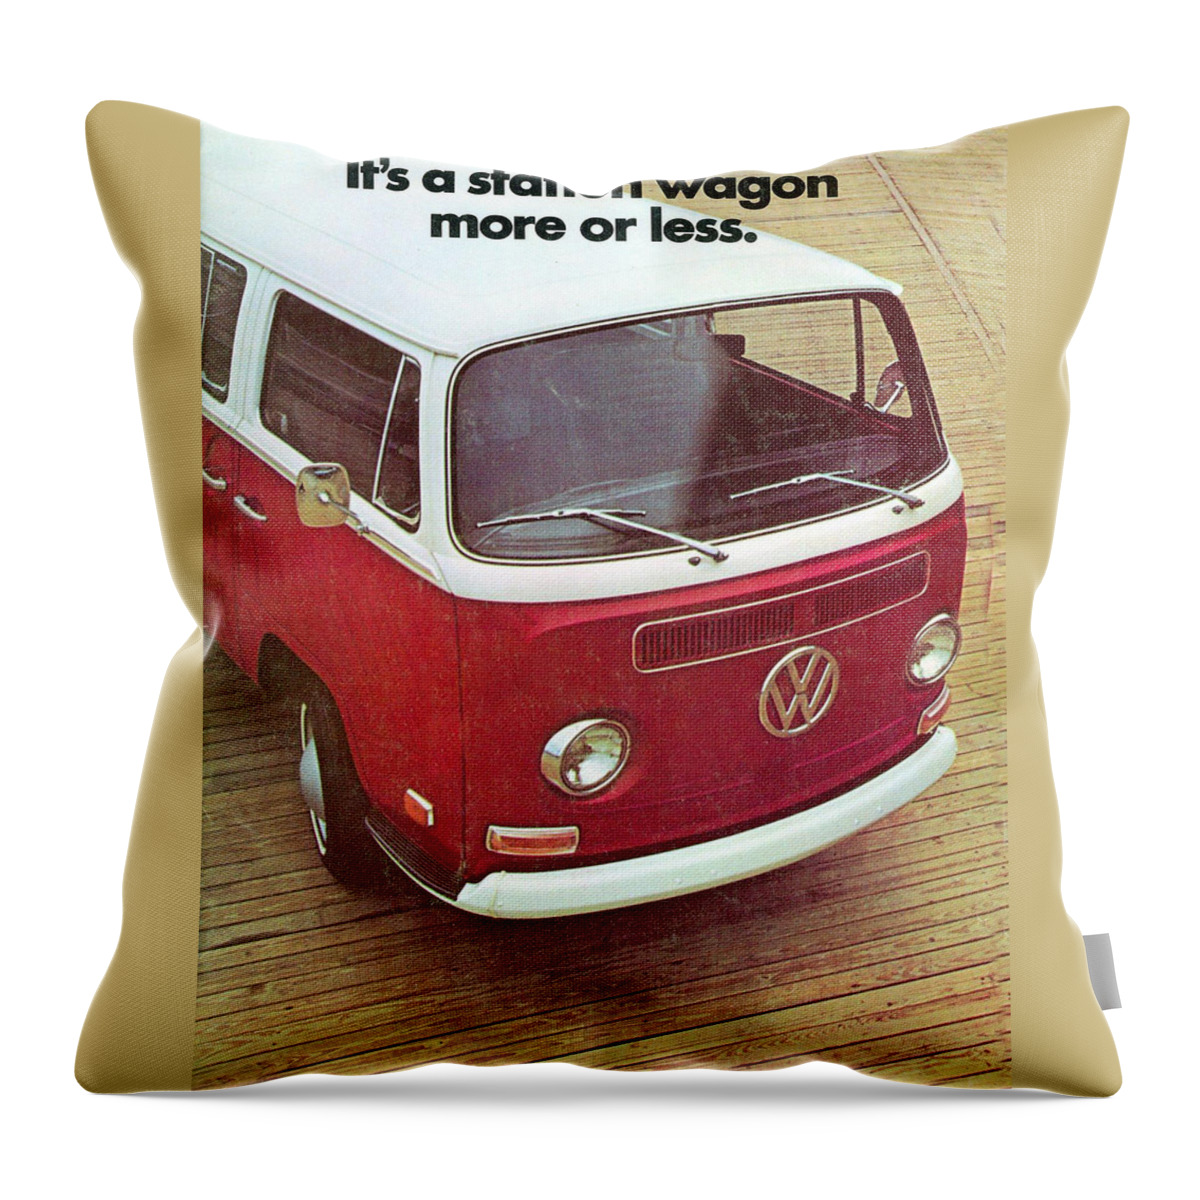 Vw Camper Throw Pillow featuring the digital art It's a station wagon more or less - VW Camper ad by Georgia Clare